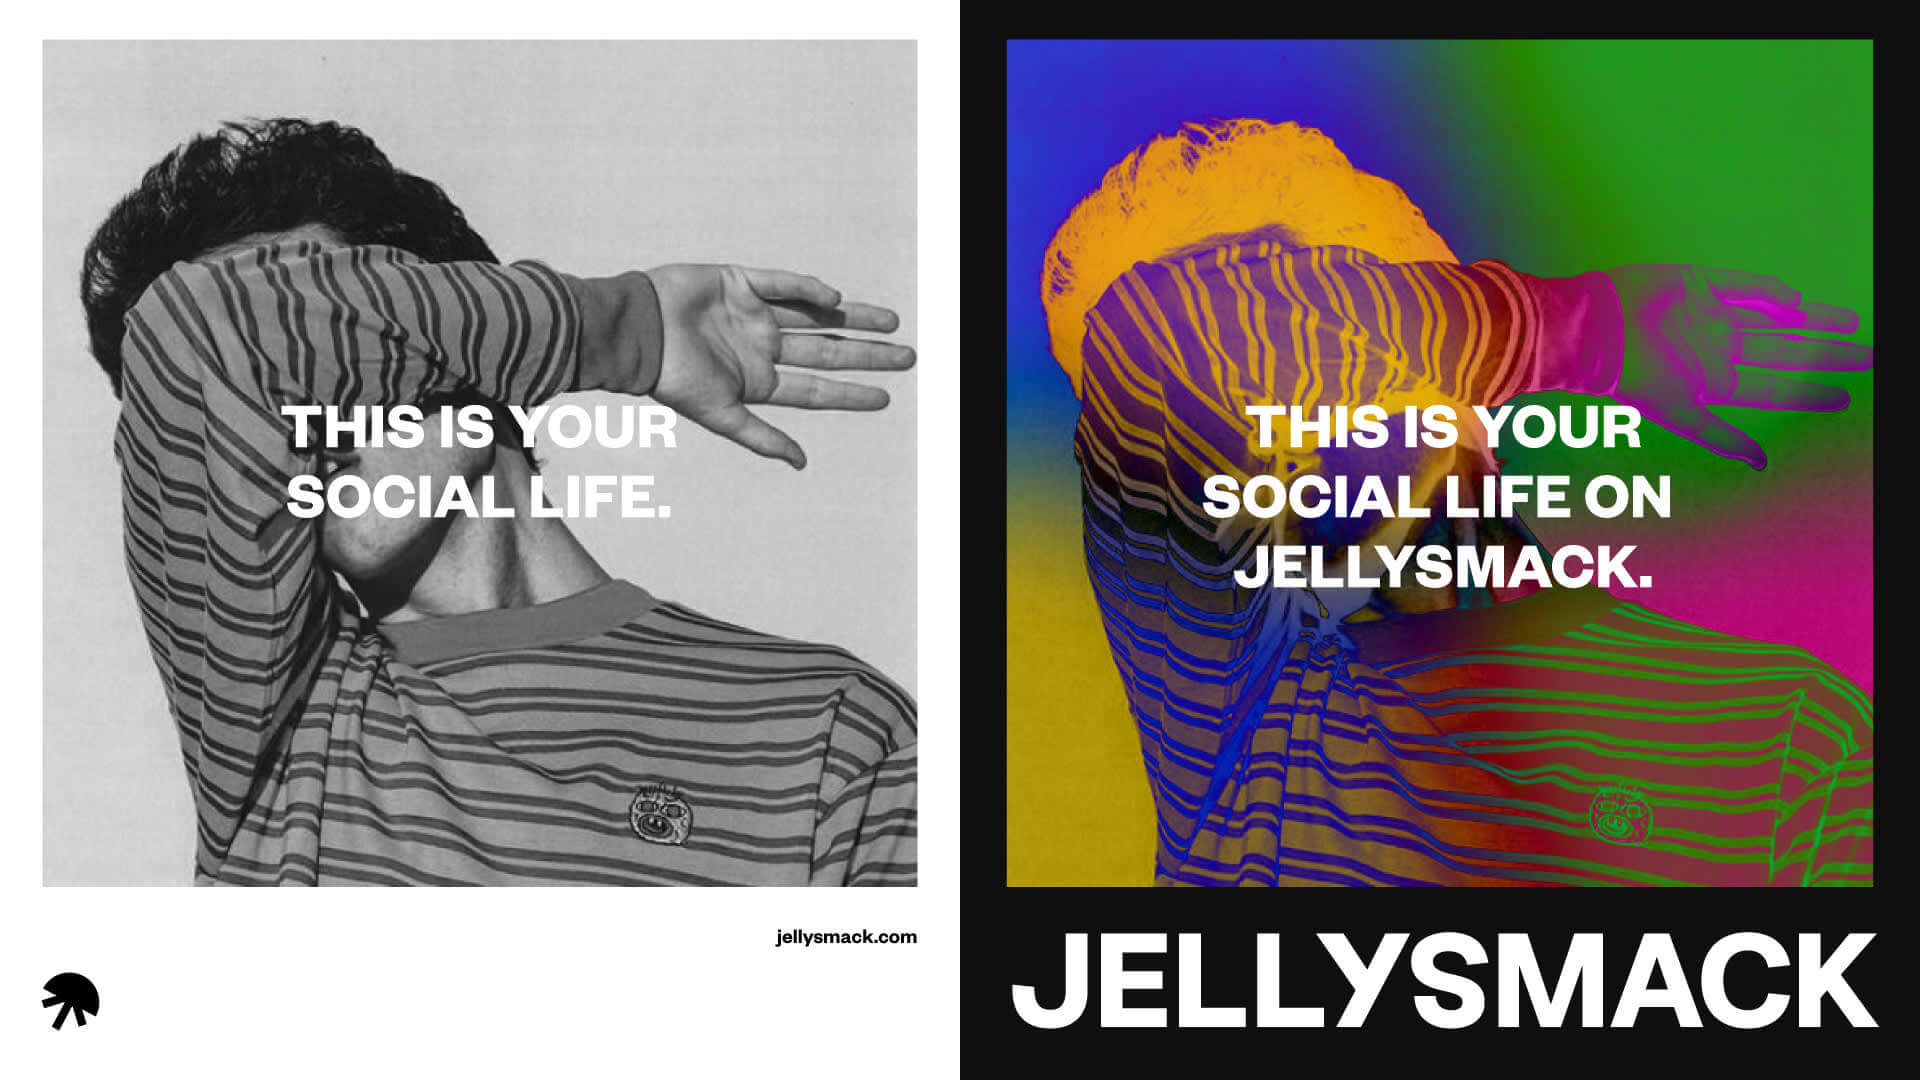 This is your social life on Jellysmack poster